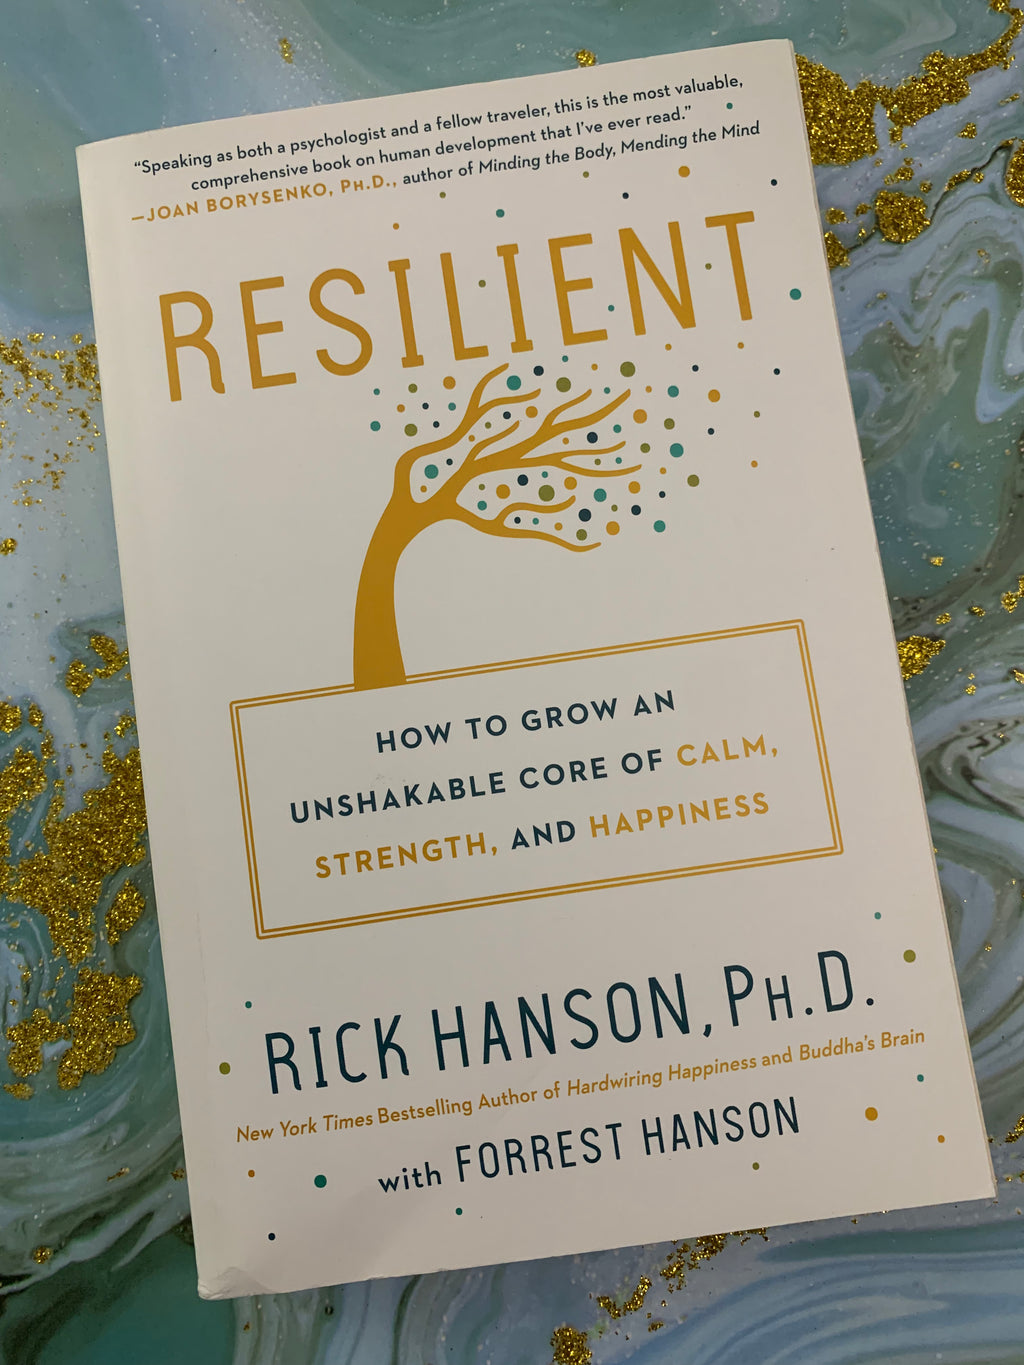 Resilient: How to Grow an Unshakable Core of Calm, Strength, and Happiness- By Rick Hanson, Ph.D.